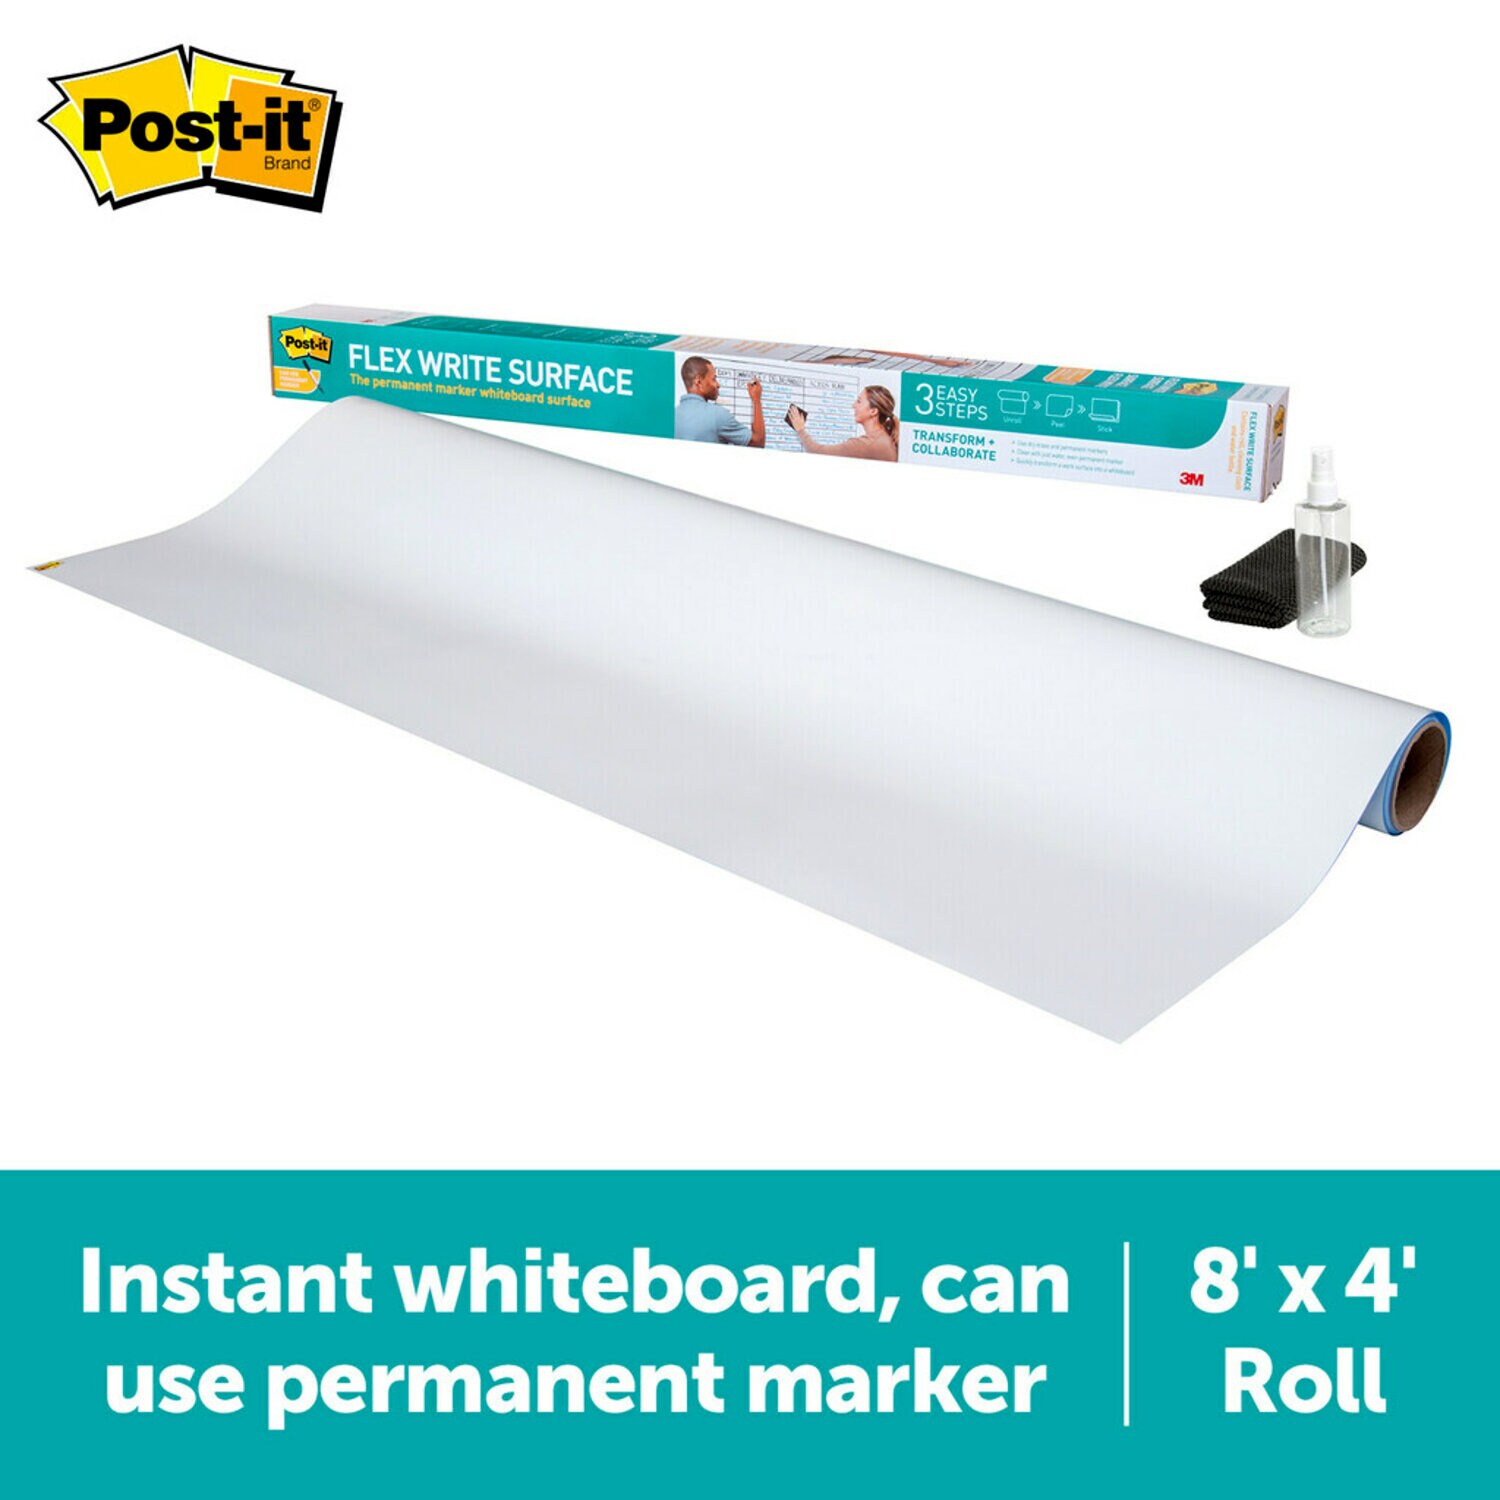 7100198316 - Post-it Flex Write Surface, The Permanent Marker Whiteboard Surface, 8 ft. x 4 ft.